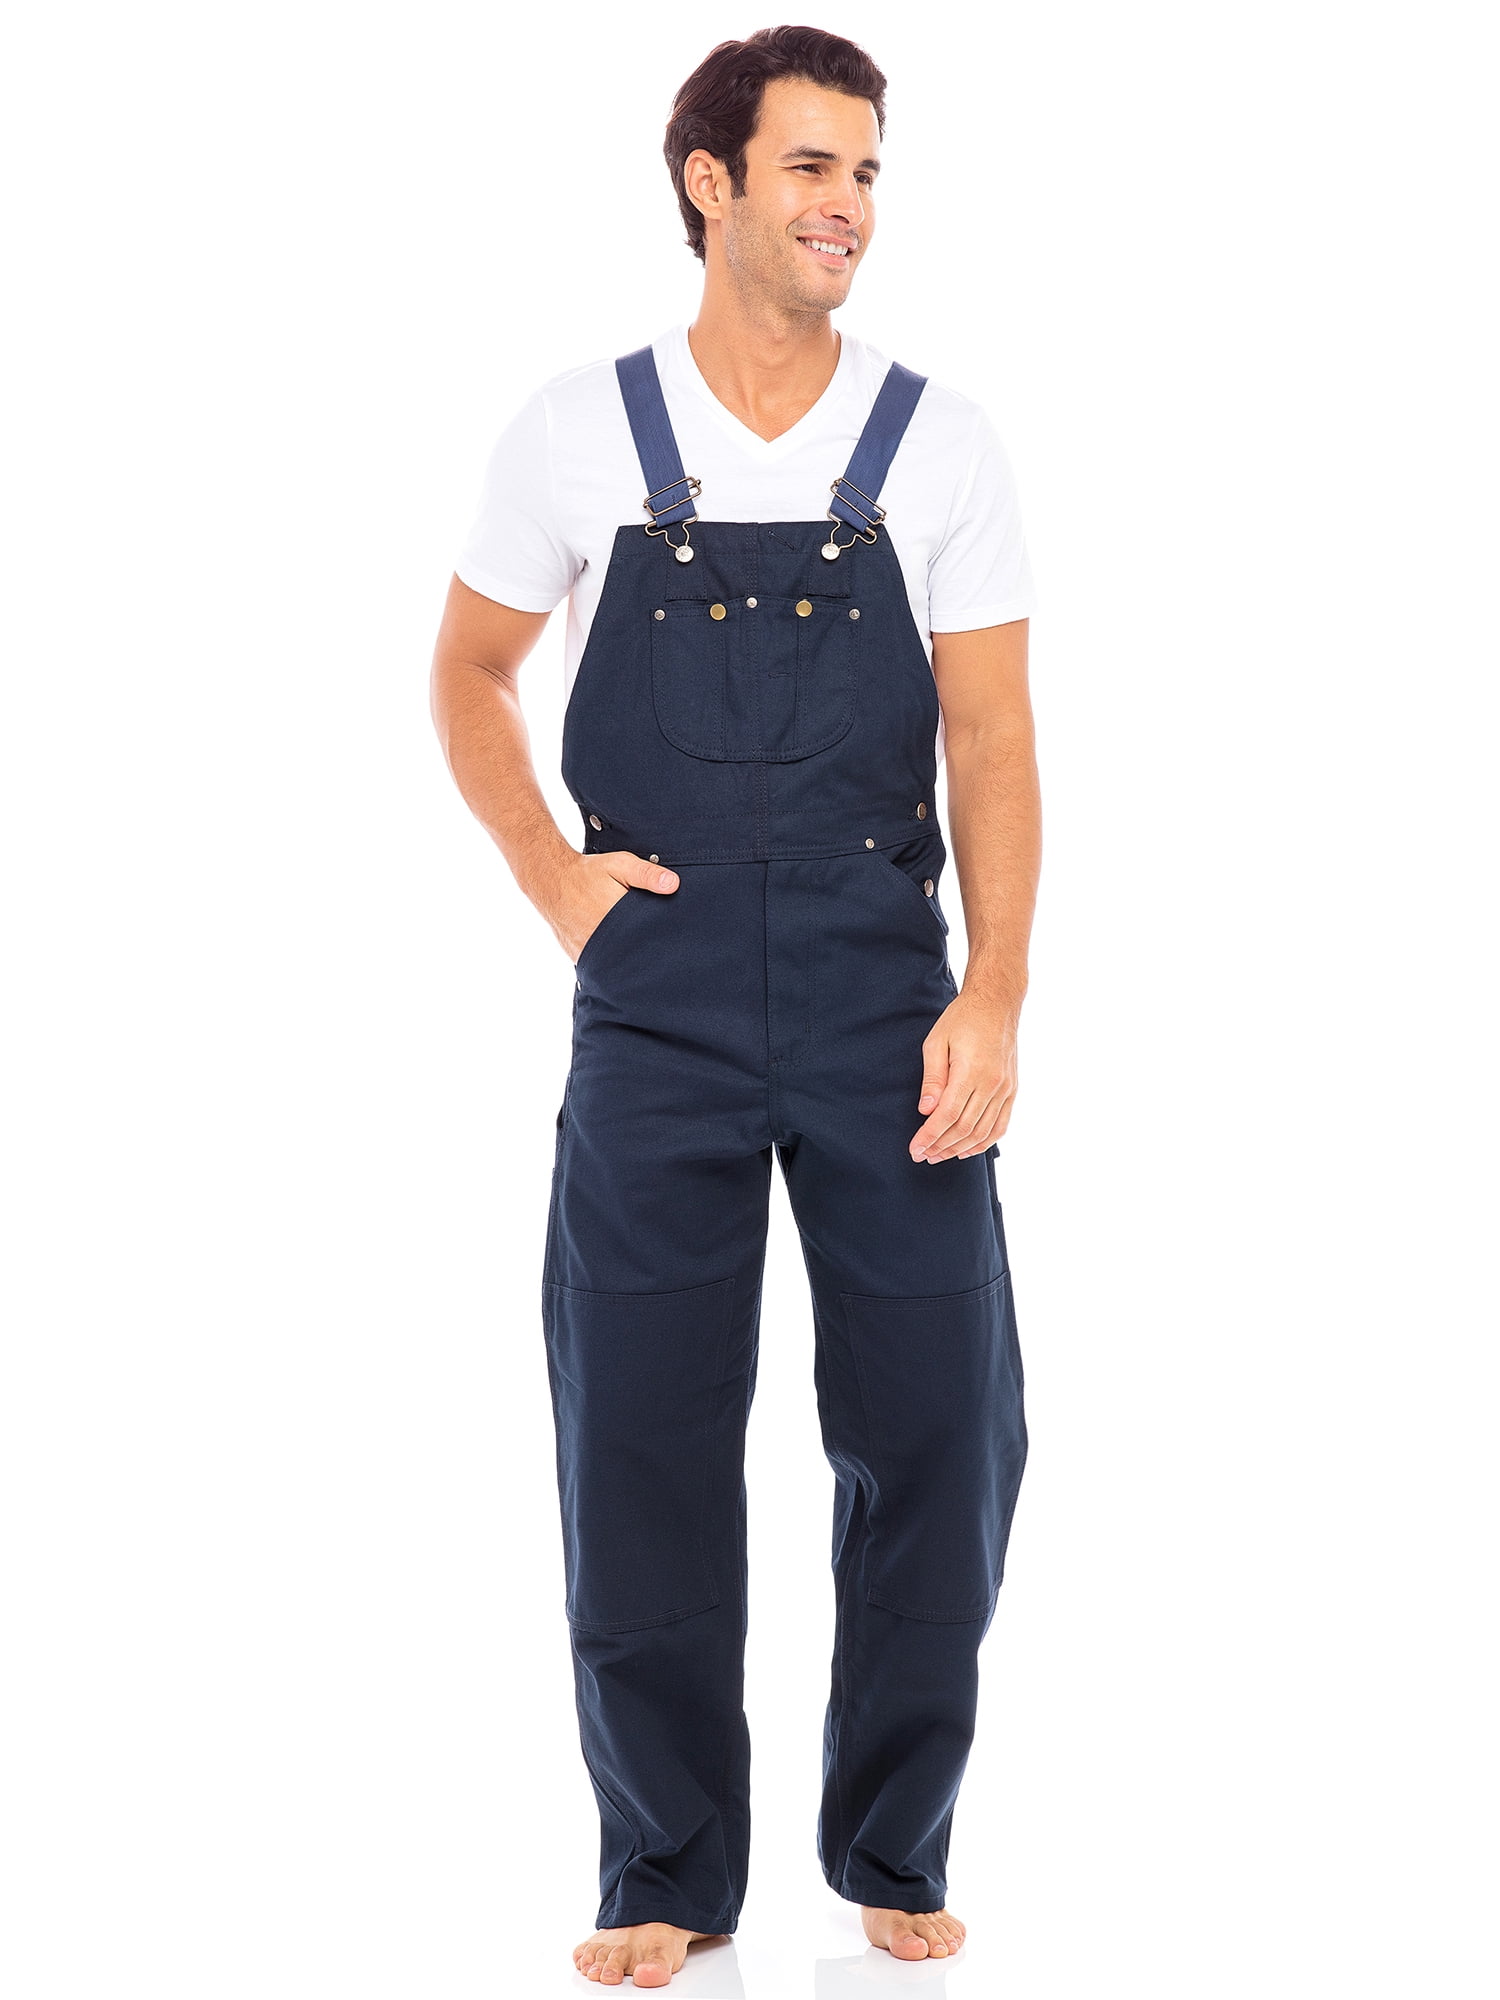 Click Ladies Womens Bib and Brace Painters Overalls Coveralls Dungarees Work Trousers